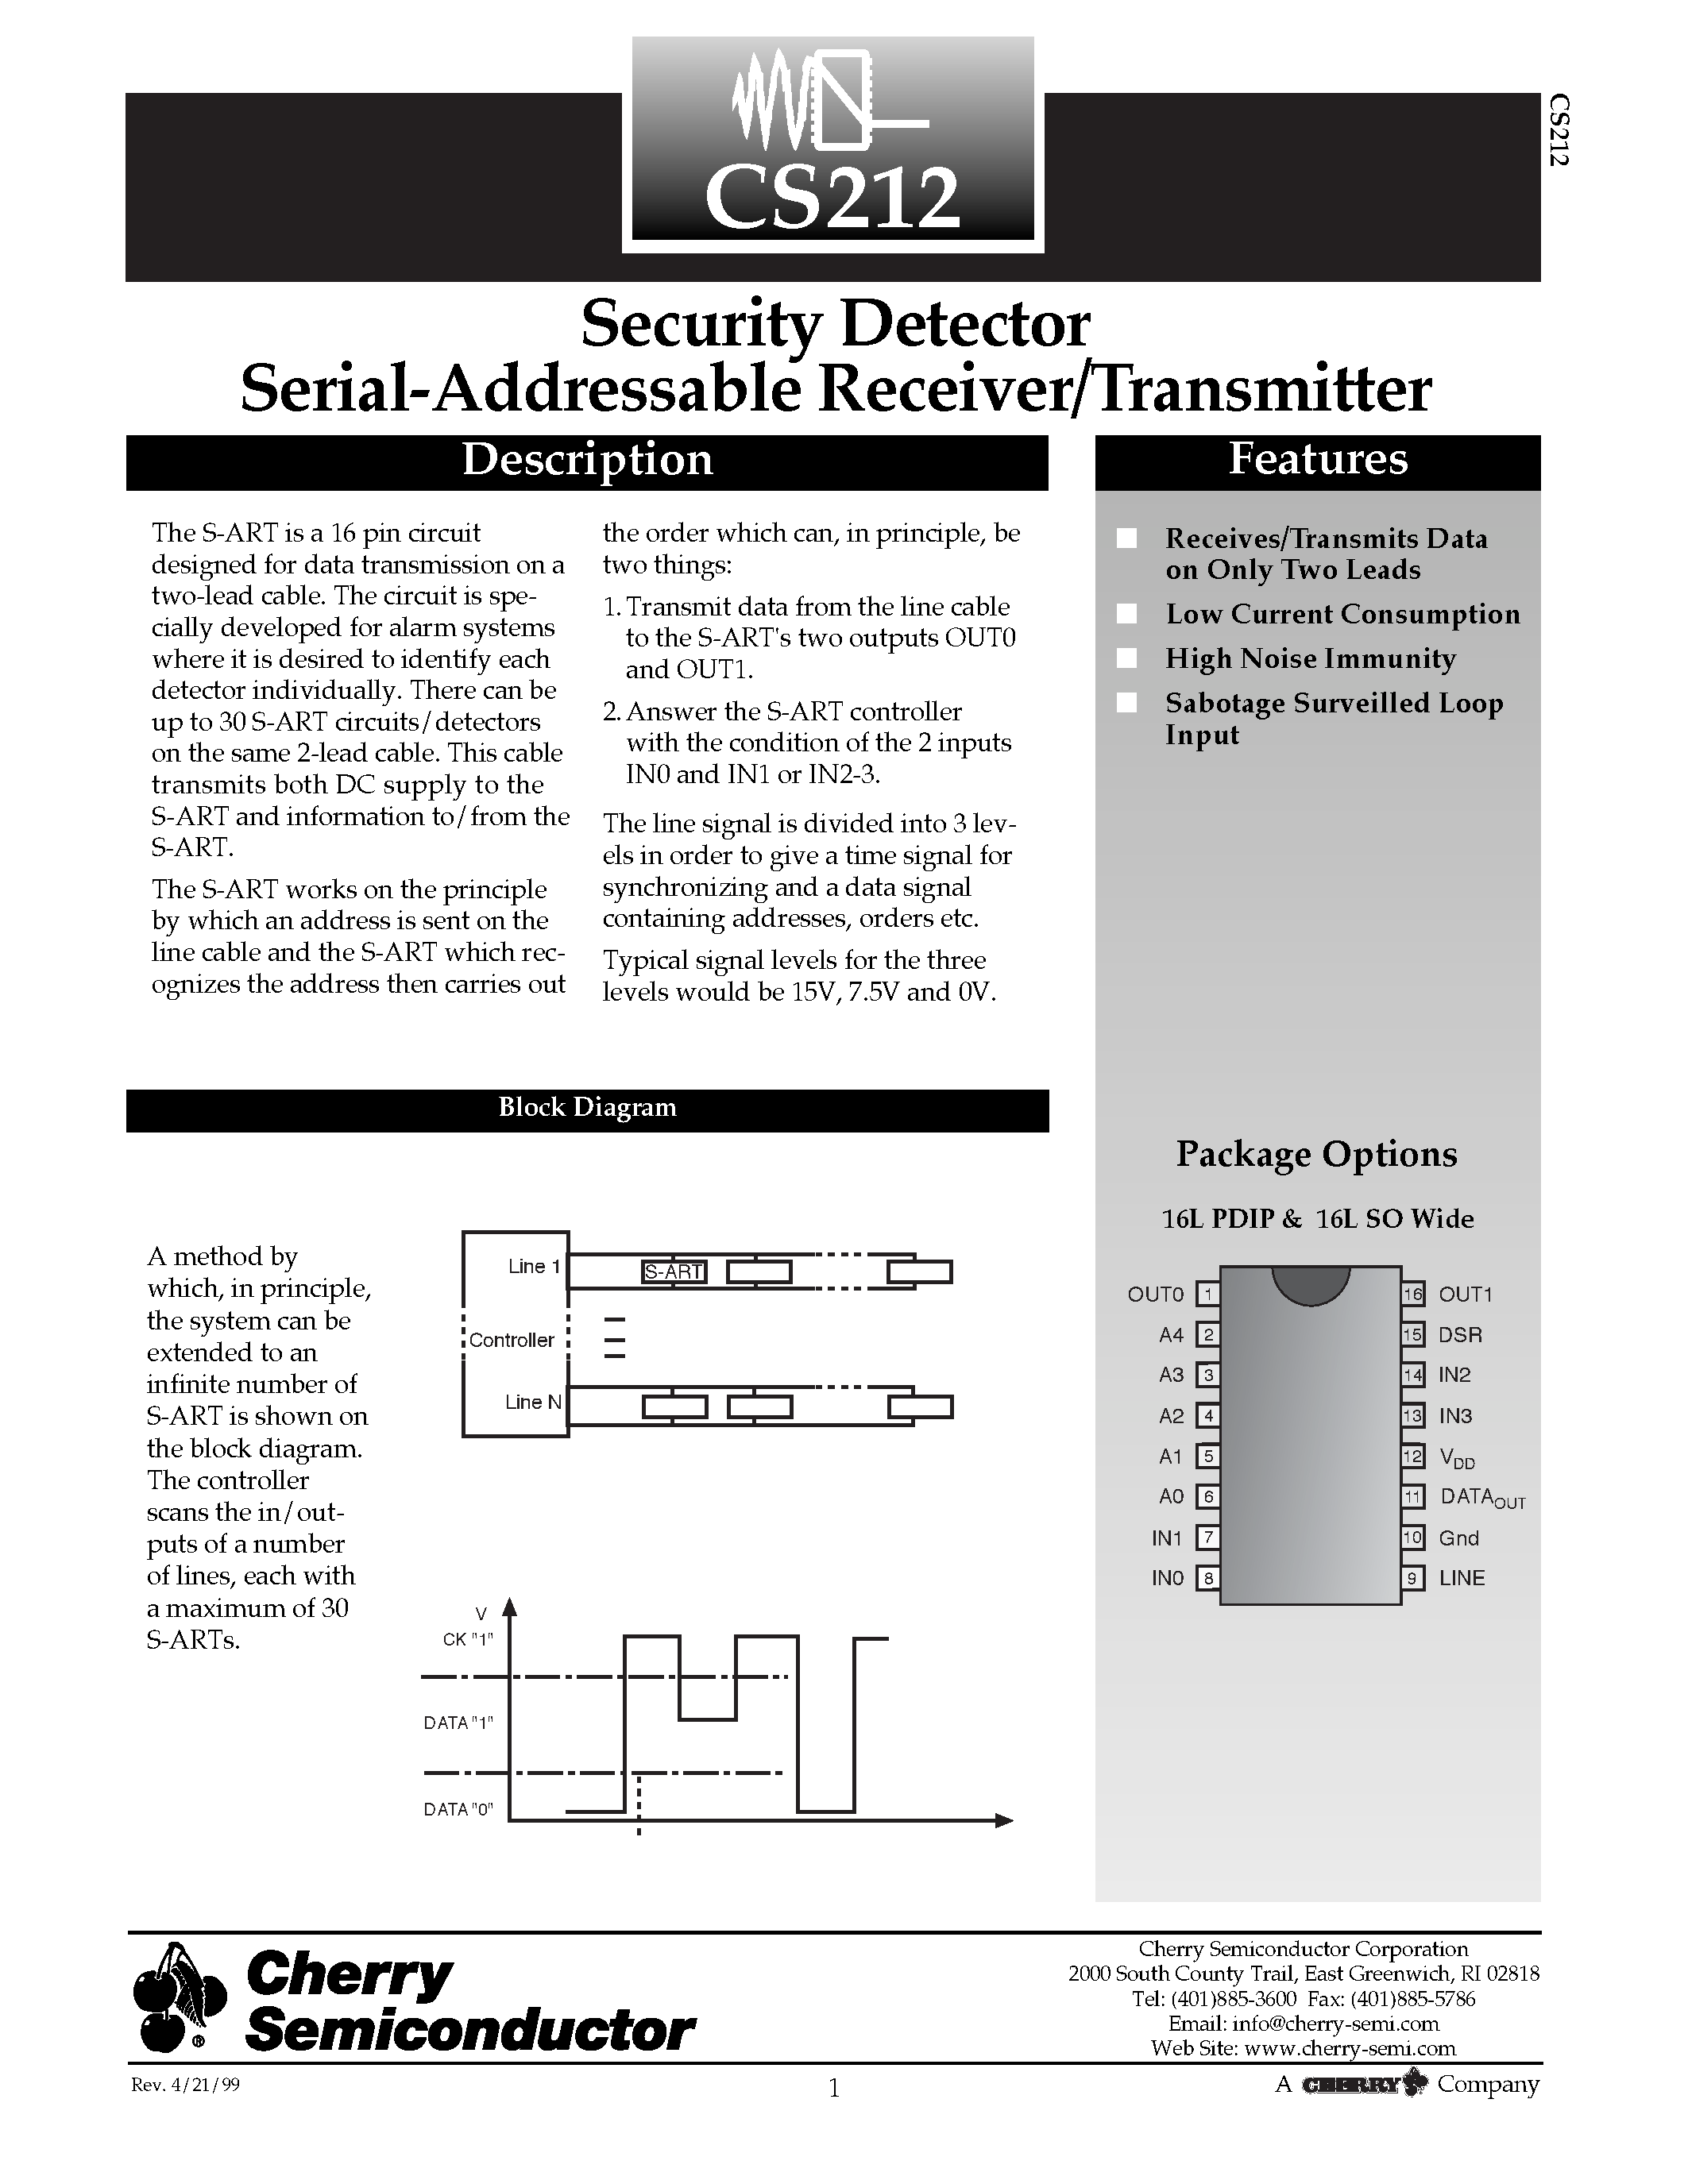 Datasheet CS212EDWR16 - Security Detector Serial-Addressable Receiver/Transmitter page 1